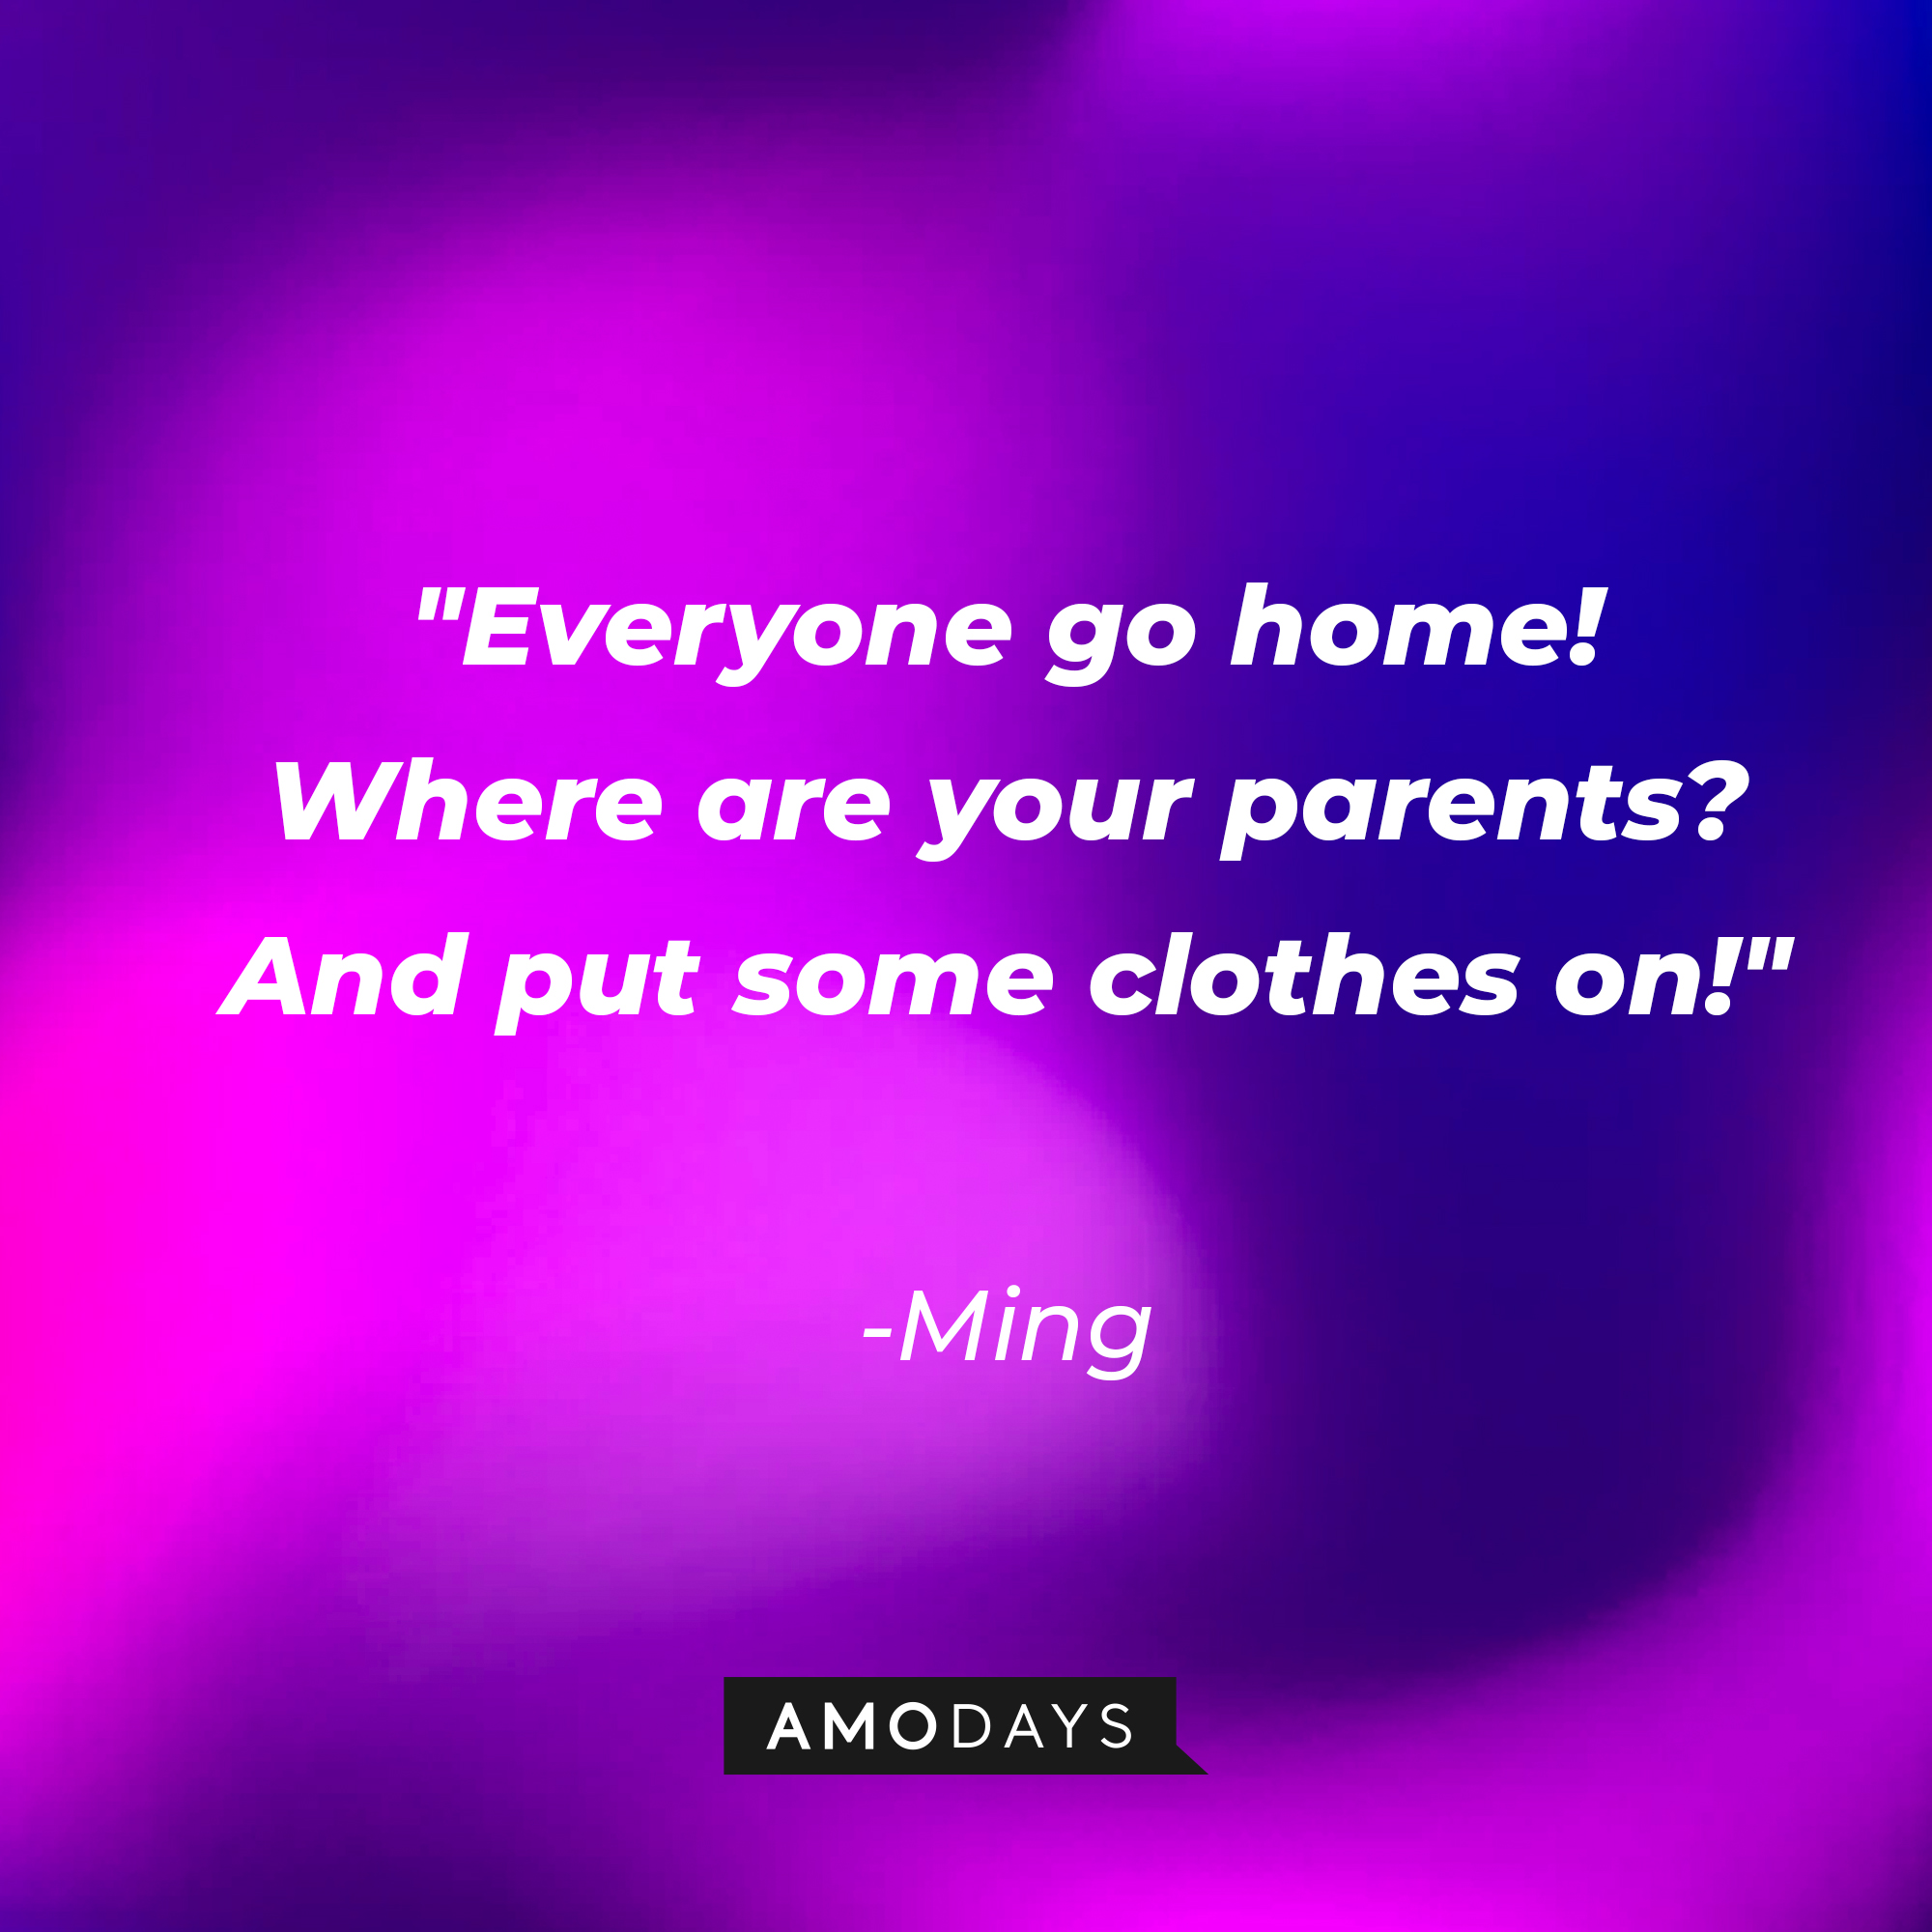 Ming's quote: "Everyone go home! Where are your parents? And put some clothes on!" | Source: AmoDays